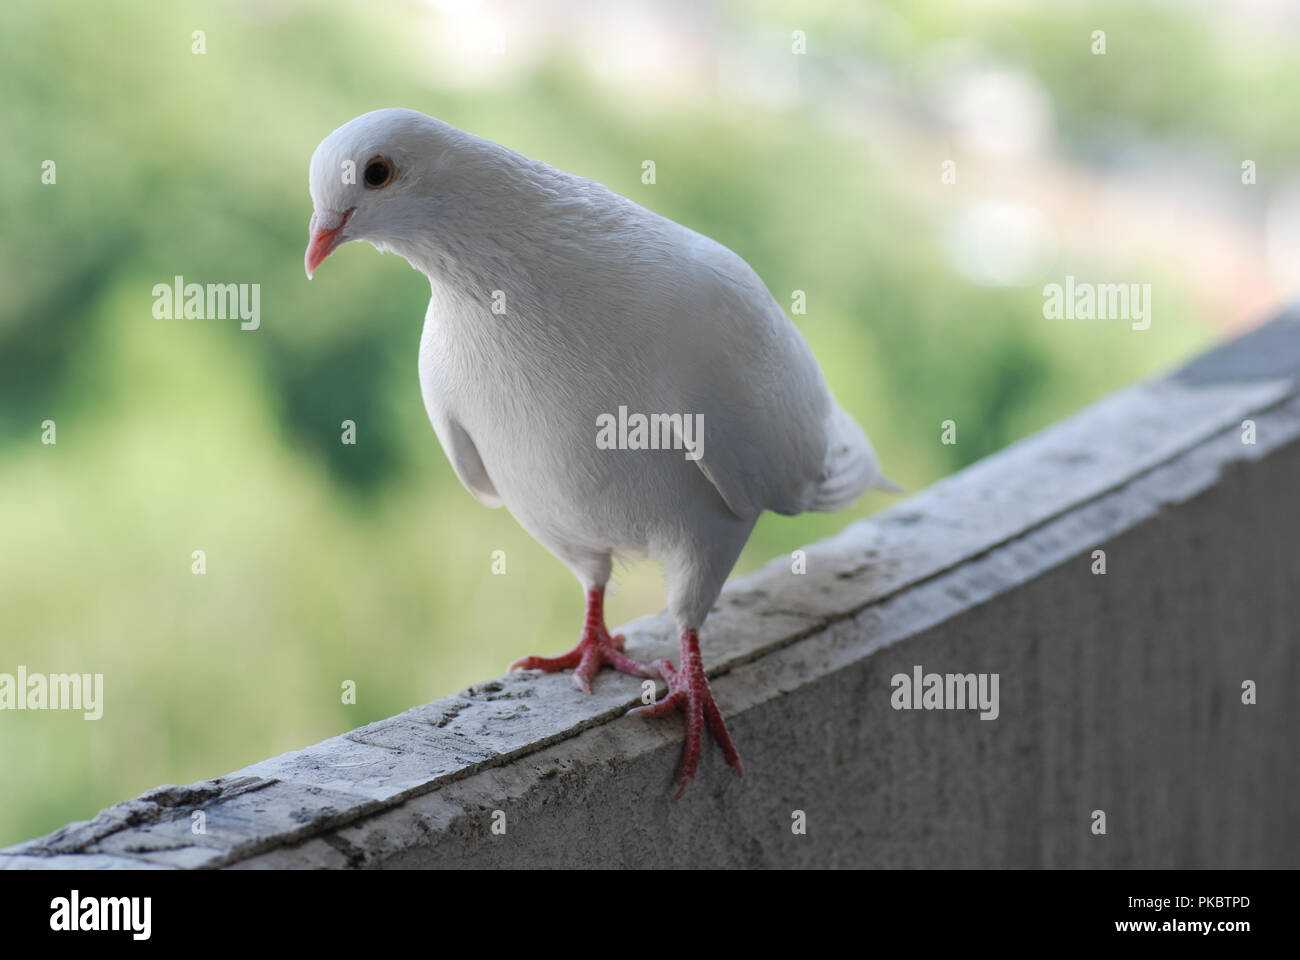 Proud white pigeon on a balcony over blurred green street background Stock Photo